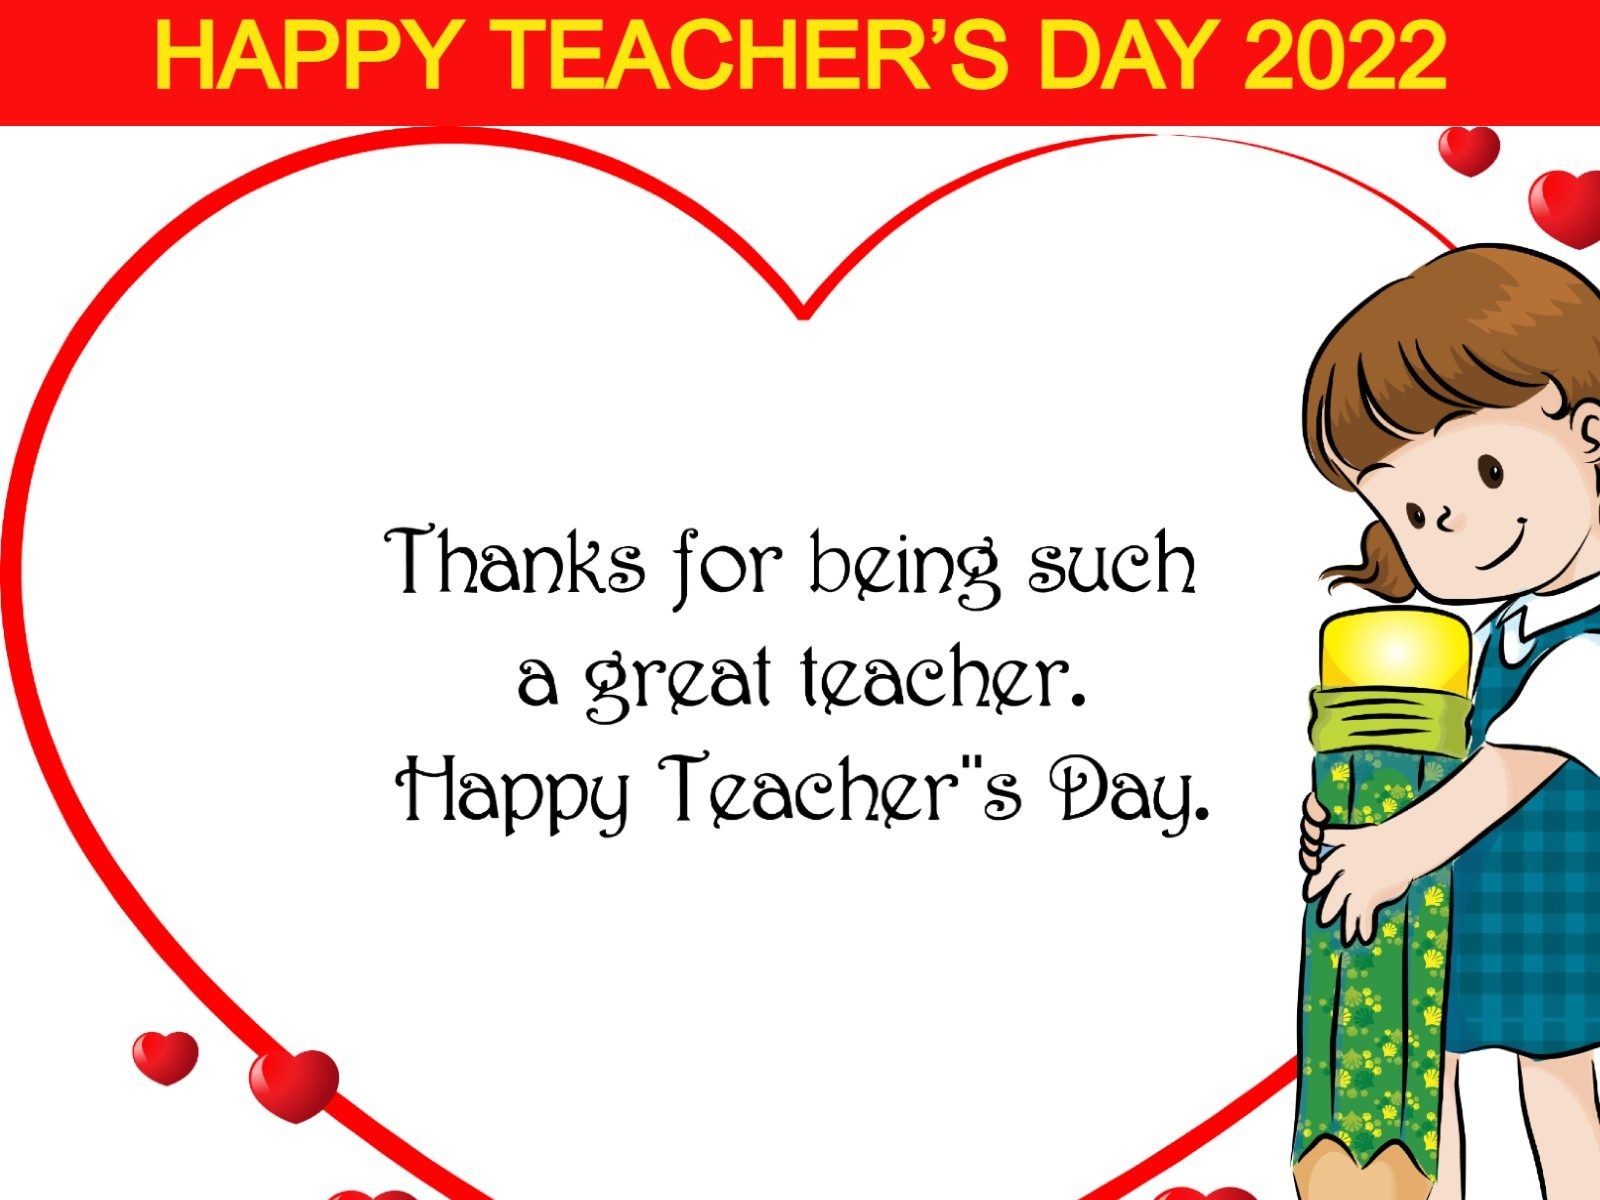 Happy Teacher's Day 2022: Heartwarming Wishes, Messages, Image, Quotes and WhatsApp Greetings to Share With Your Guru